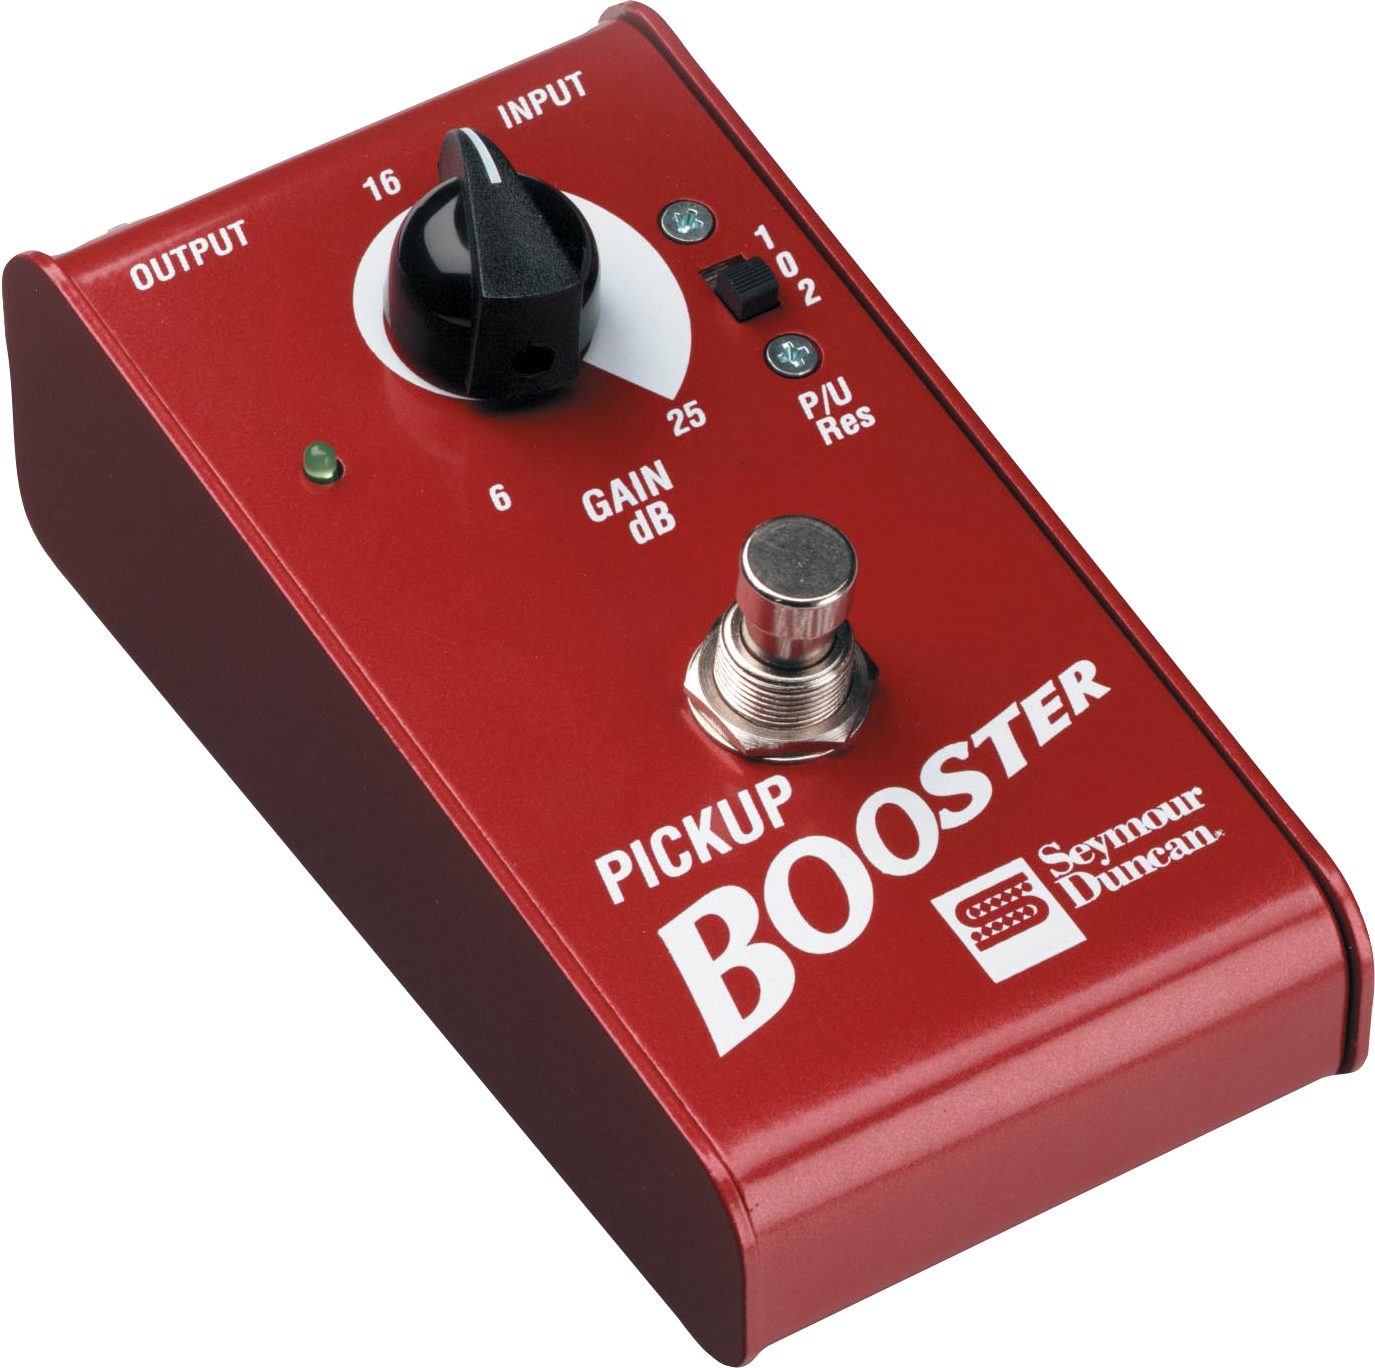 Seymour Duncan SFX-01 Pickup Booster Pedal | zZounds